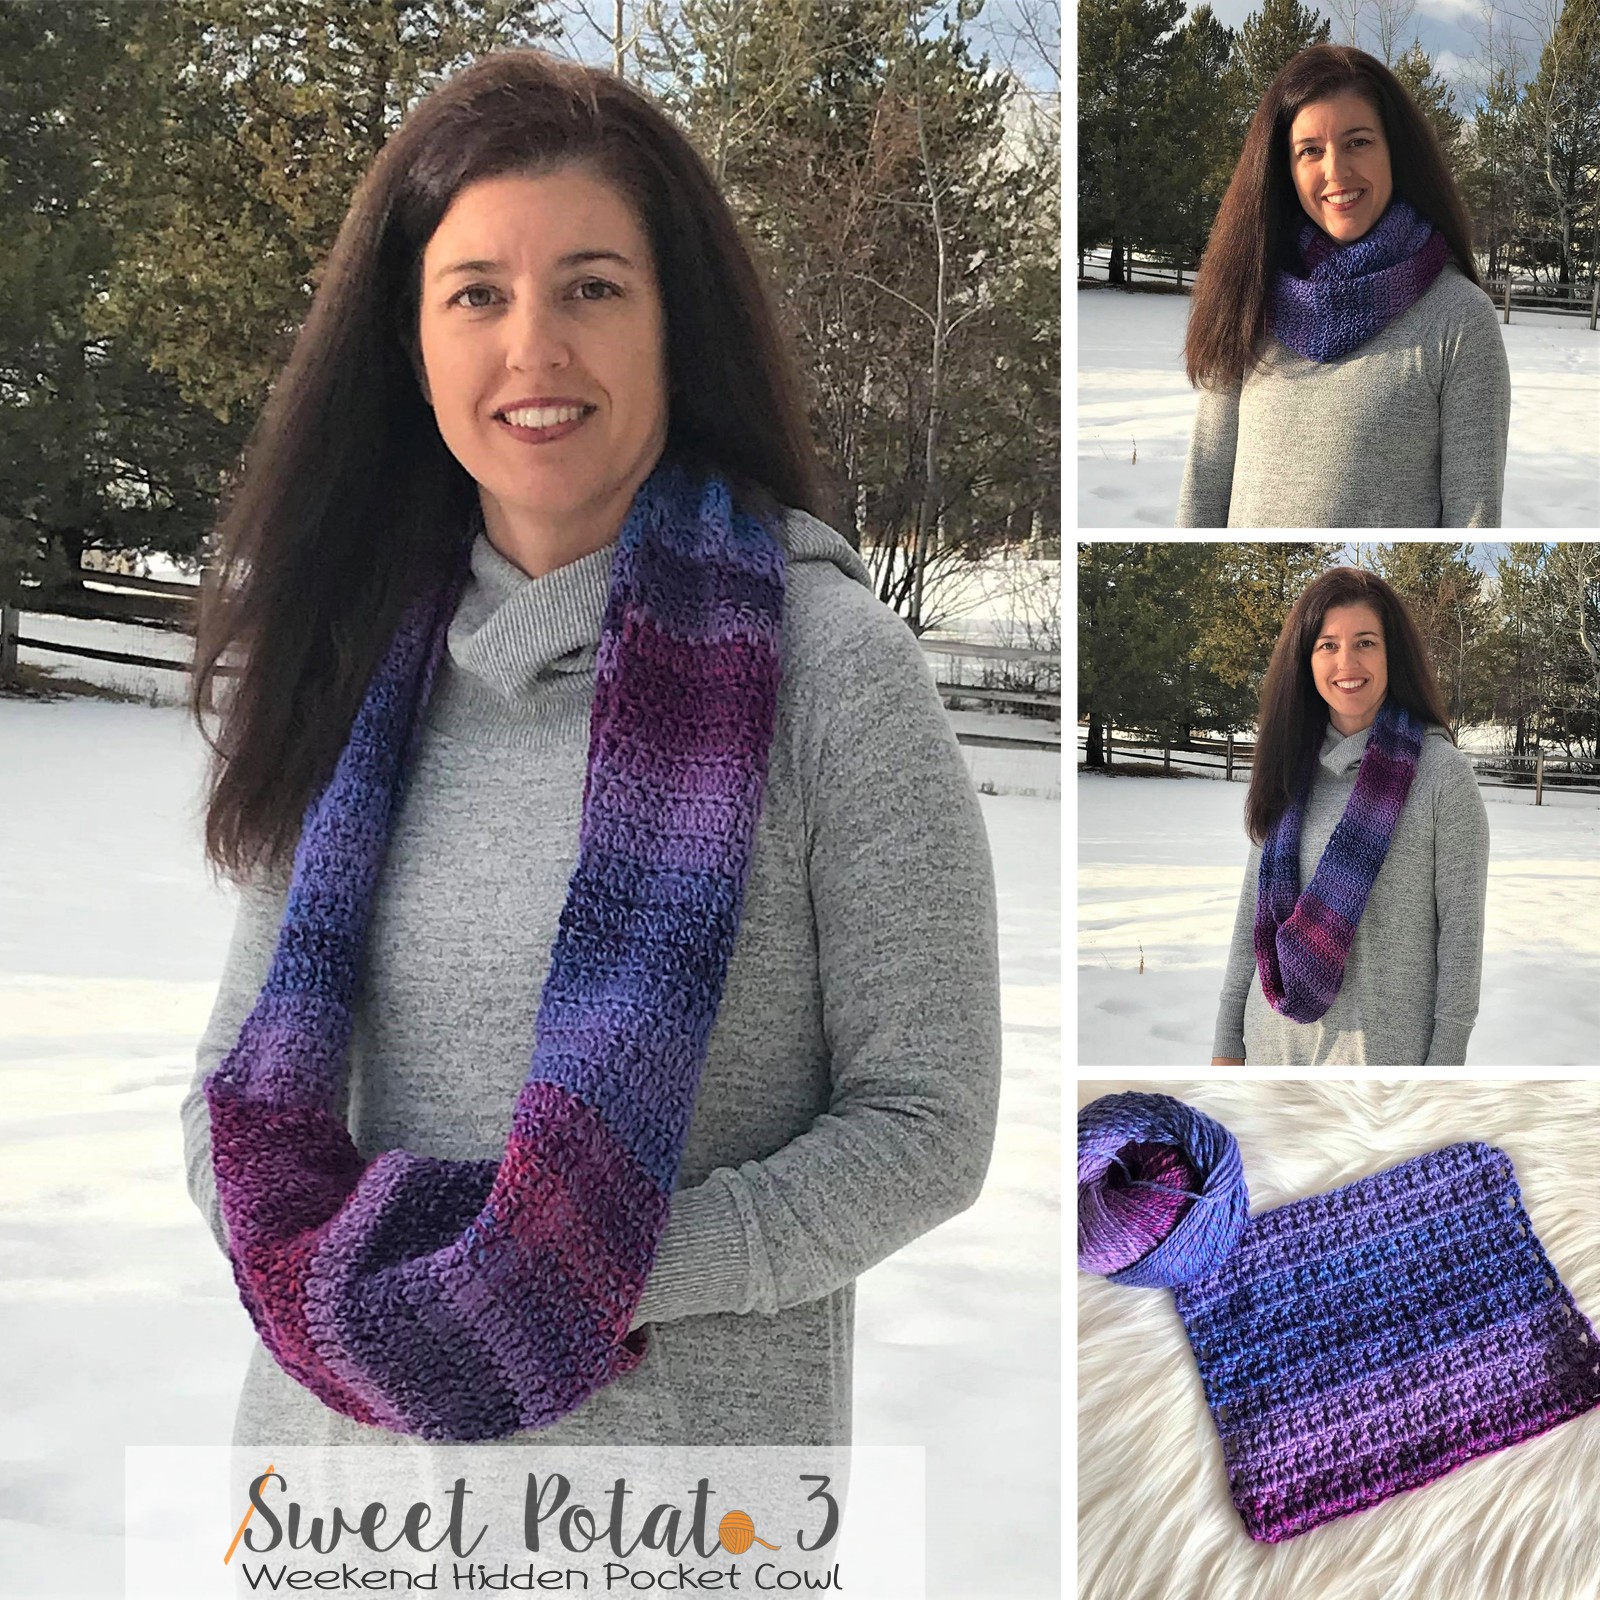 You are currently viewing Weekend Hidden Pocket Cowl – Crochet Pattern